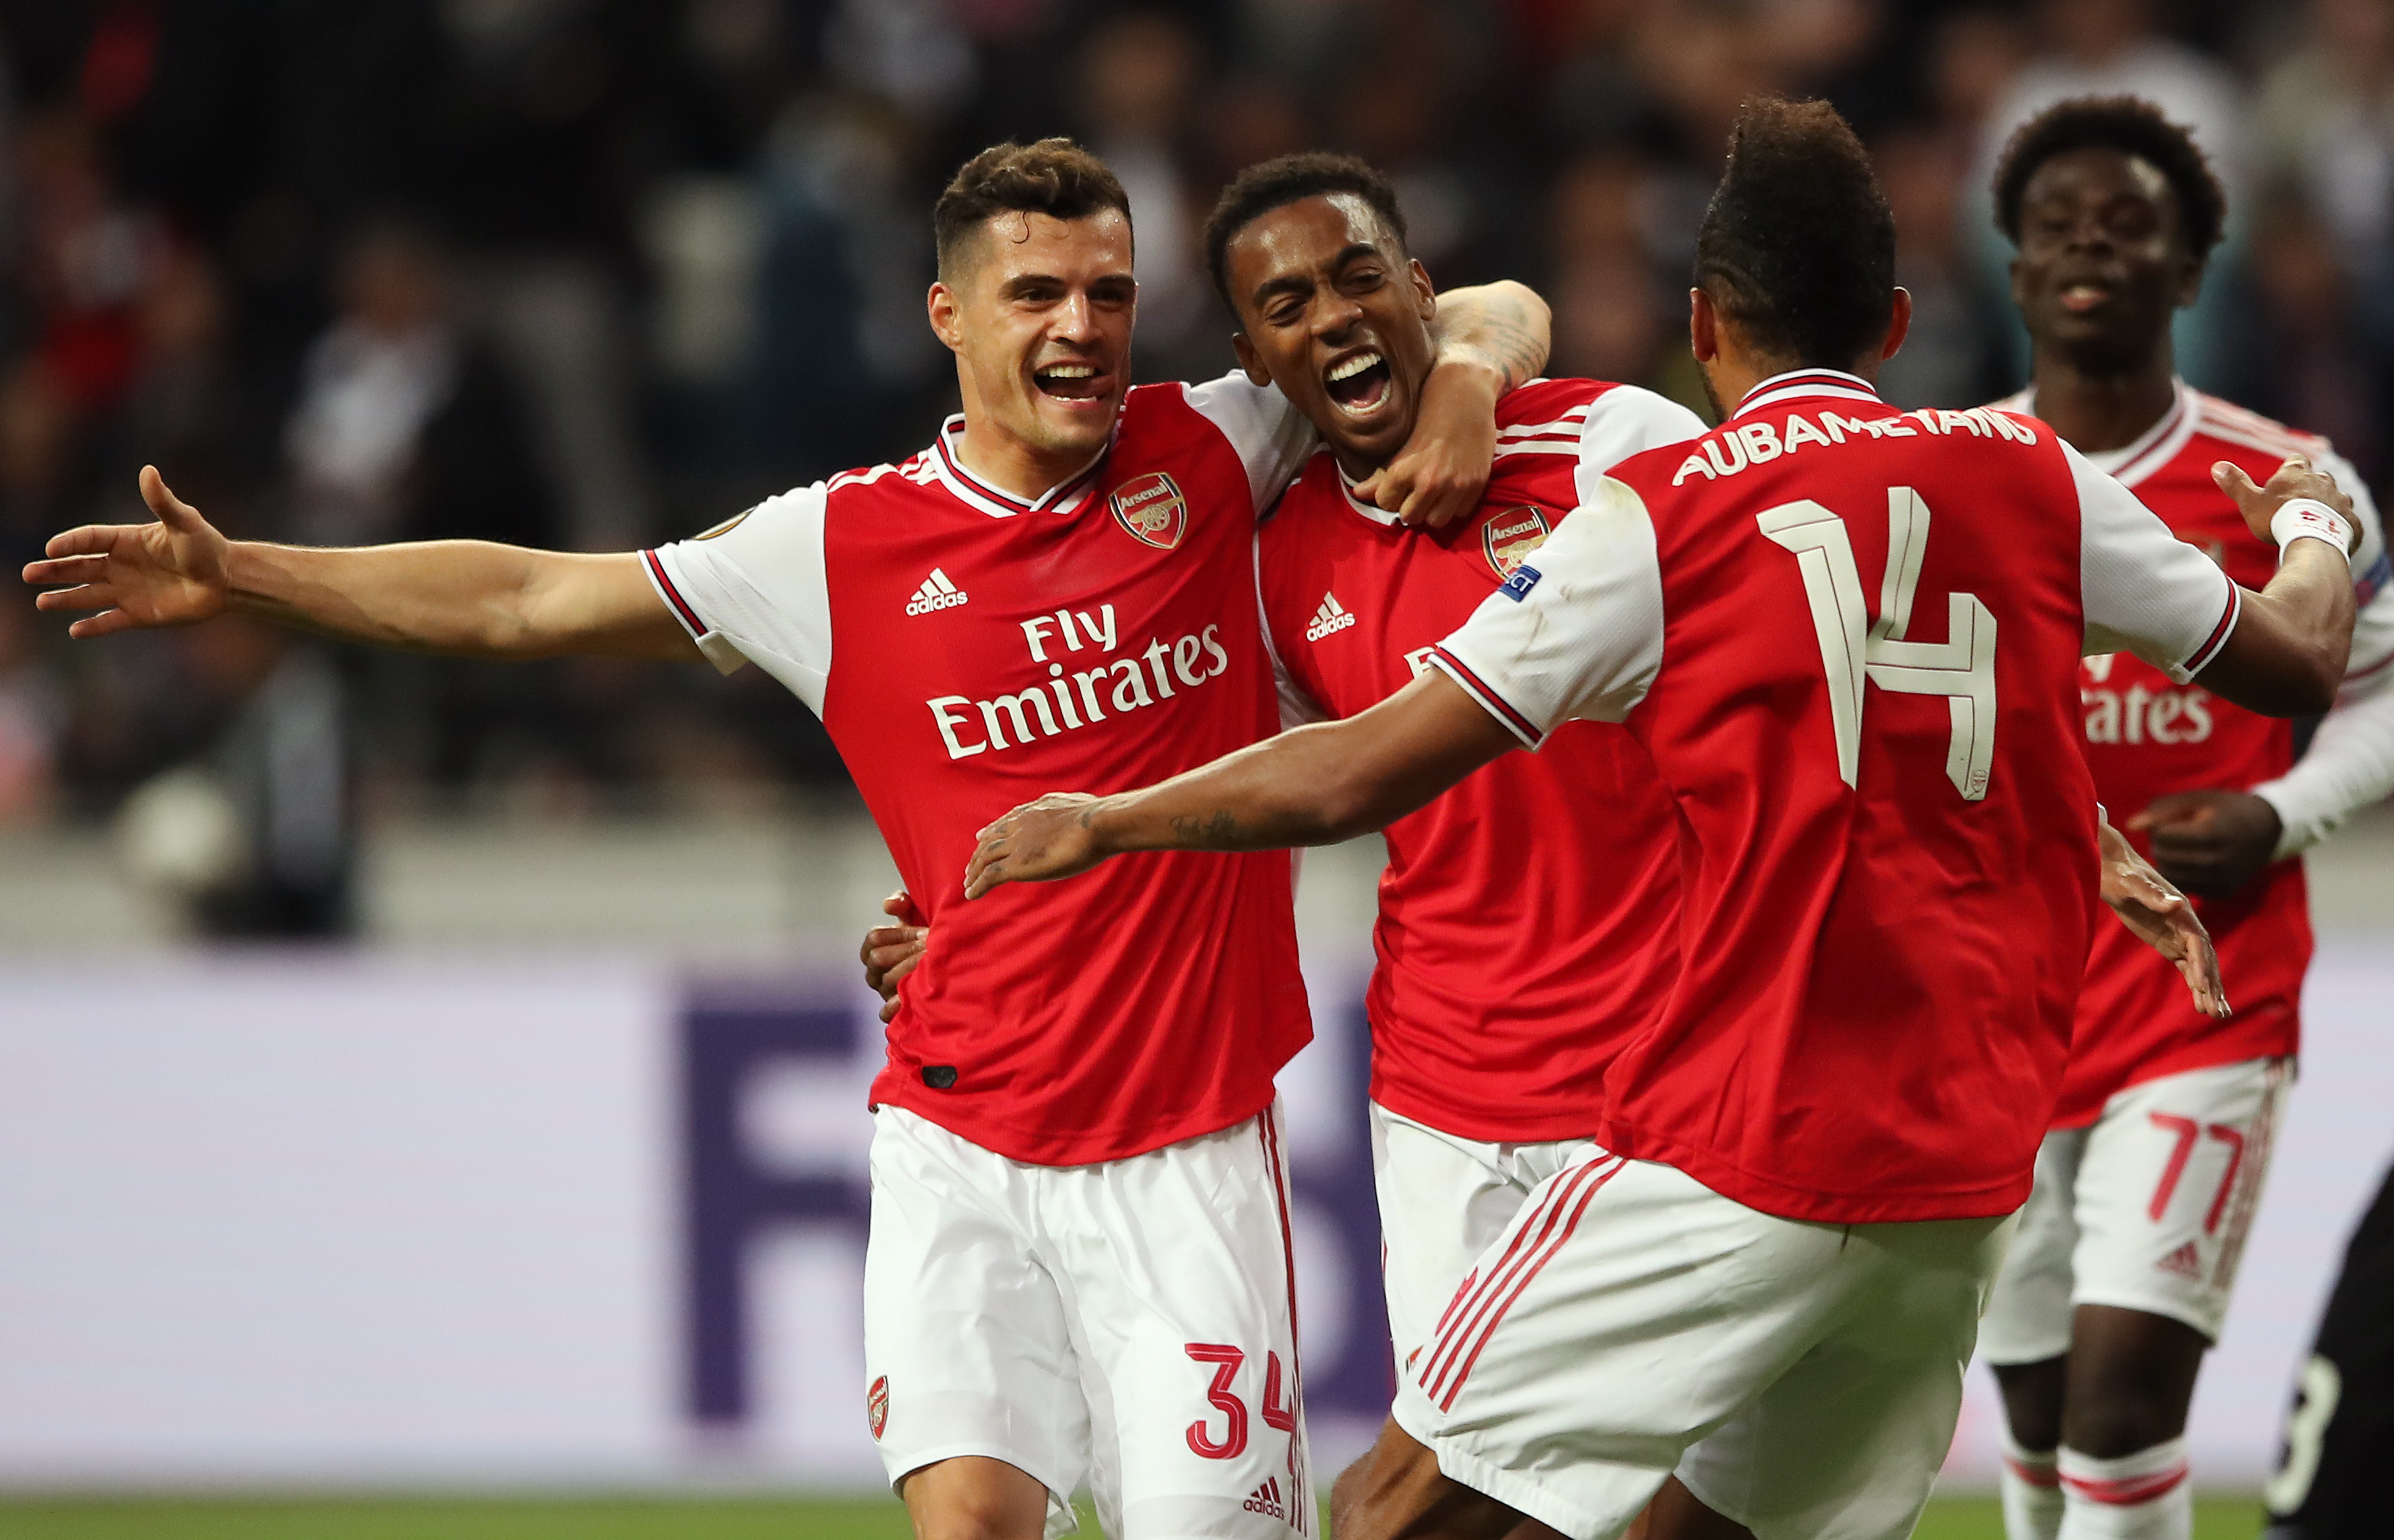 FRANKFURT AM MAIN, GERMANY - SEPTEMBER 19: Joe Willock of Arsenal celebrates with Granit Xhaka after he scores his teams first goal during the UEFA Europa League group F match between Eintracht Frankfurt and Arsenal FC at  on September 19, 2019 in Frankfurt am Main, Germany. (Photo by Christian Kaspar-Bartke/Bongarts/Getty Images)